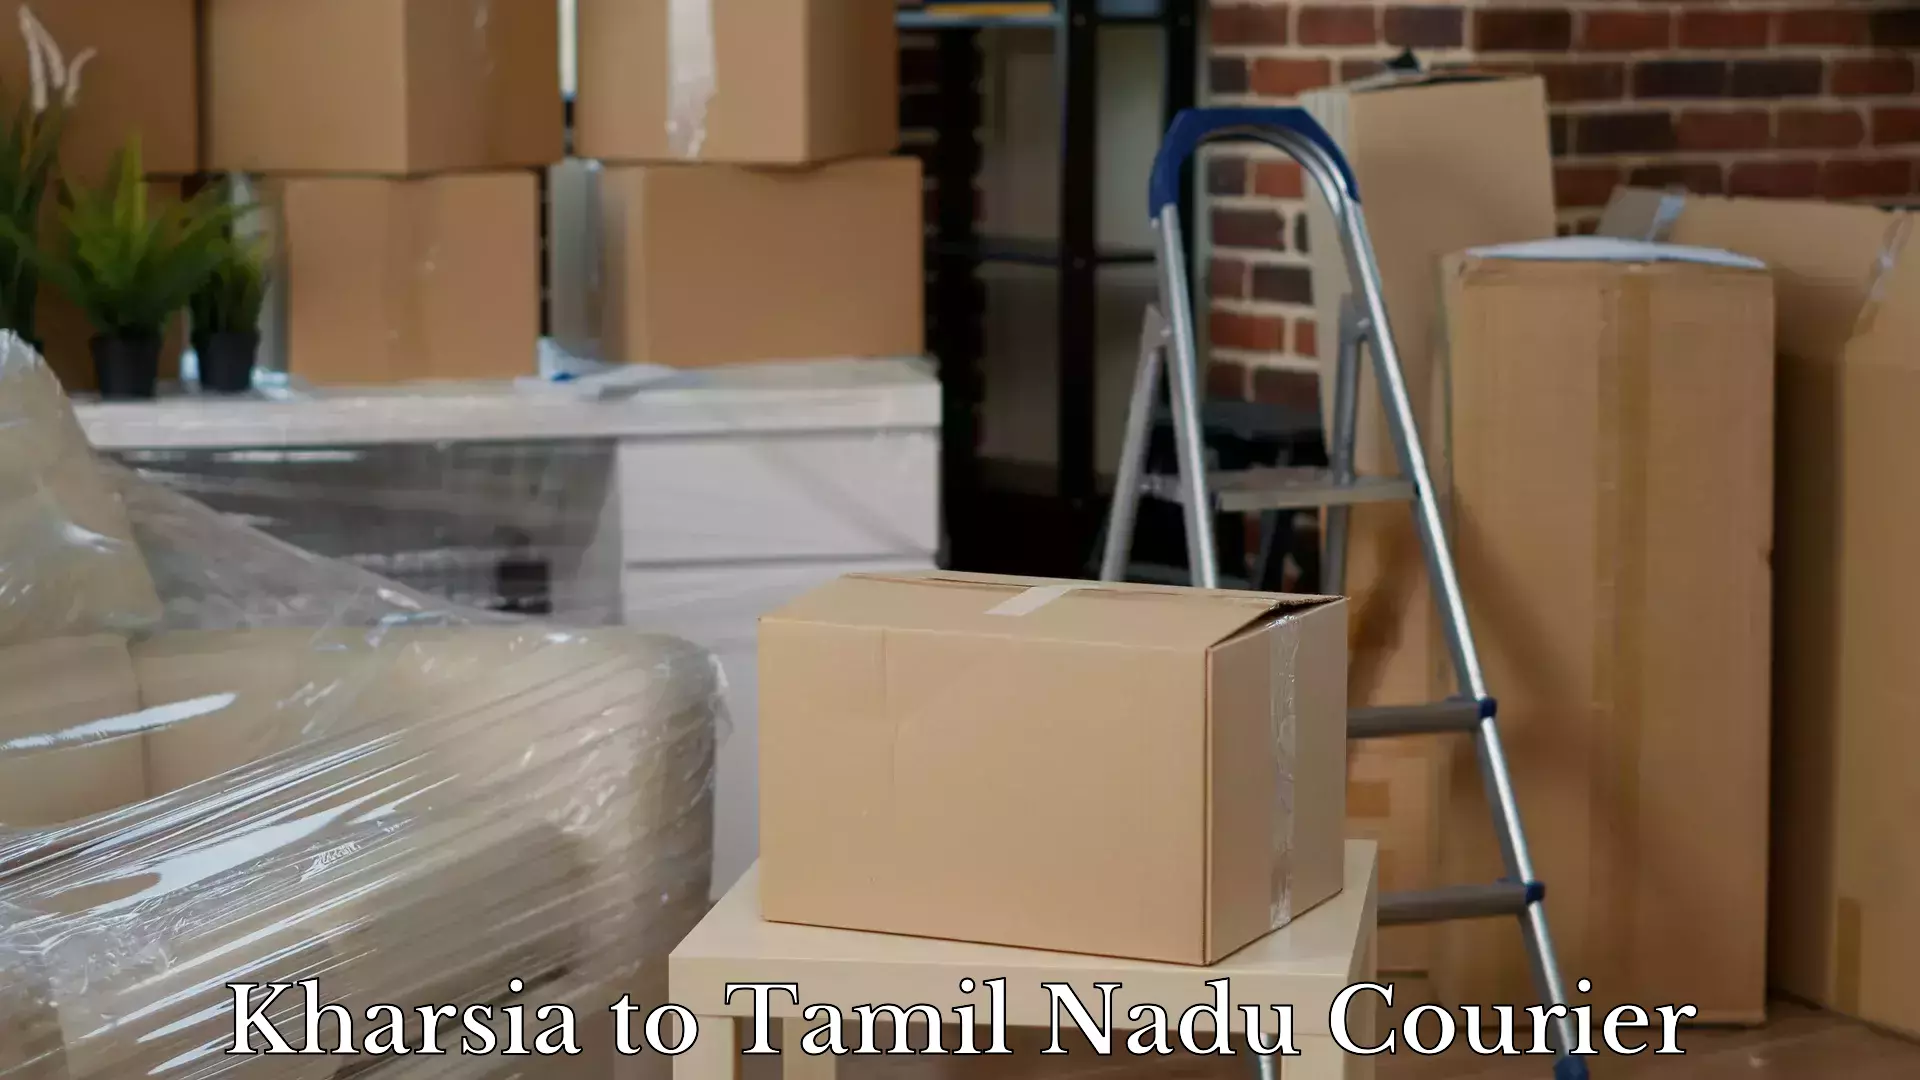 Instant baggage transport quote Kharsia to Trichy